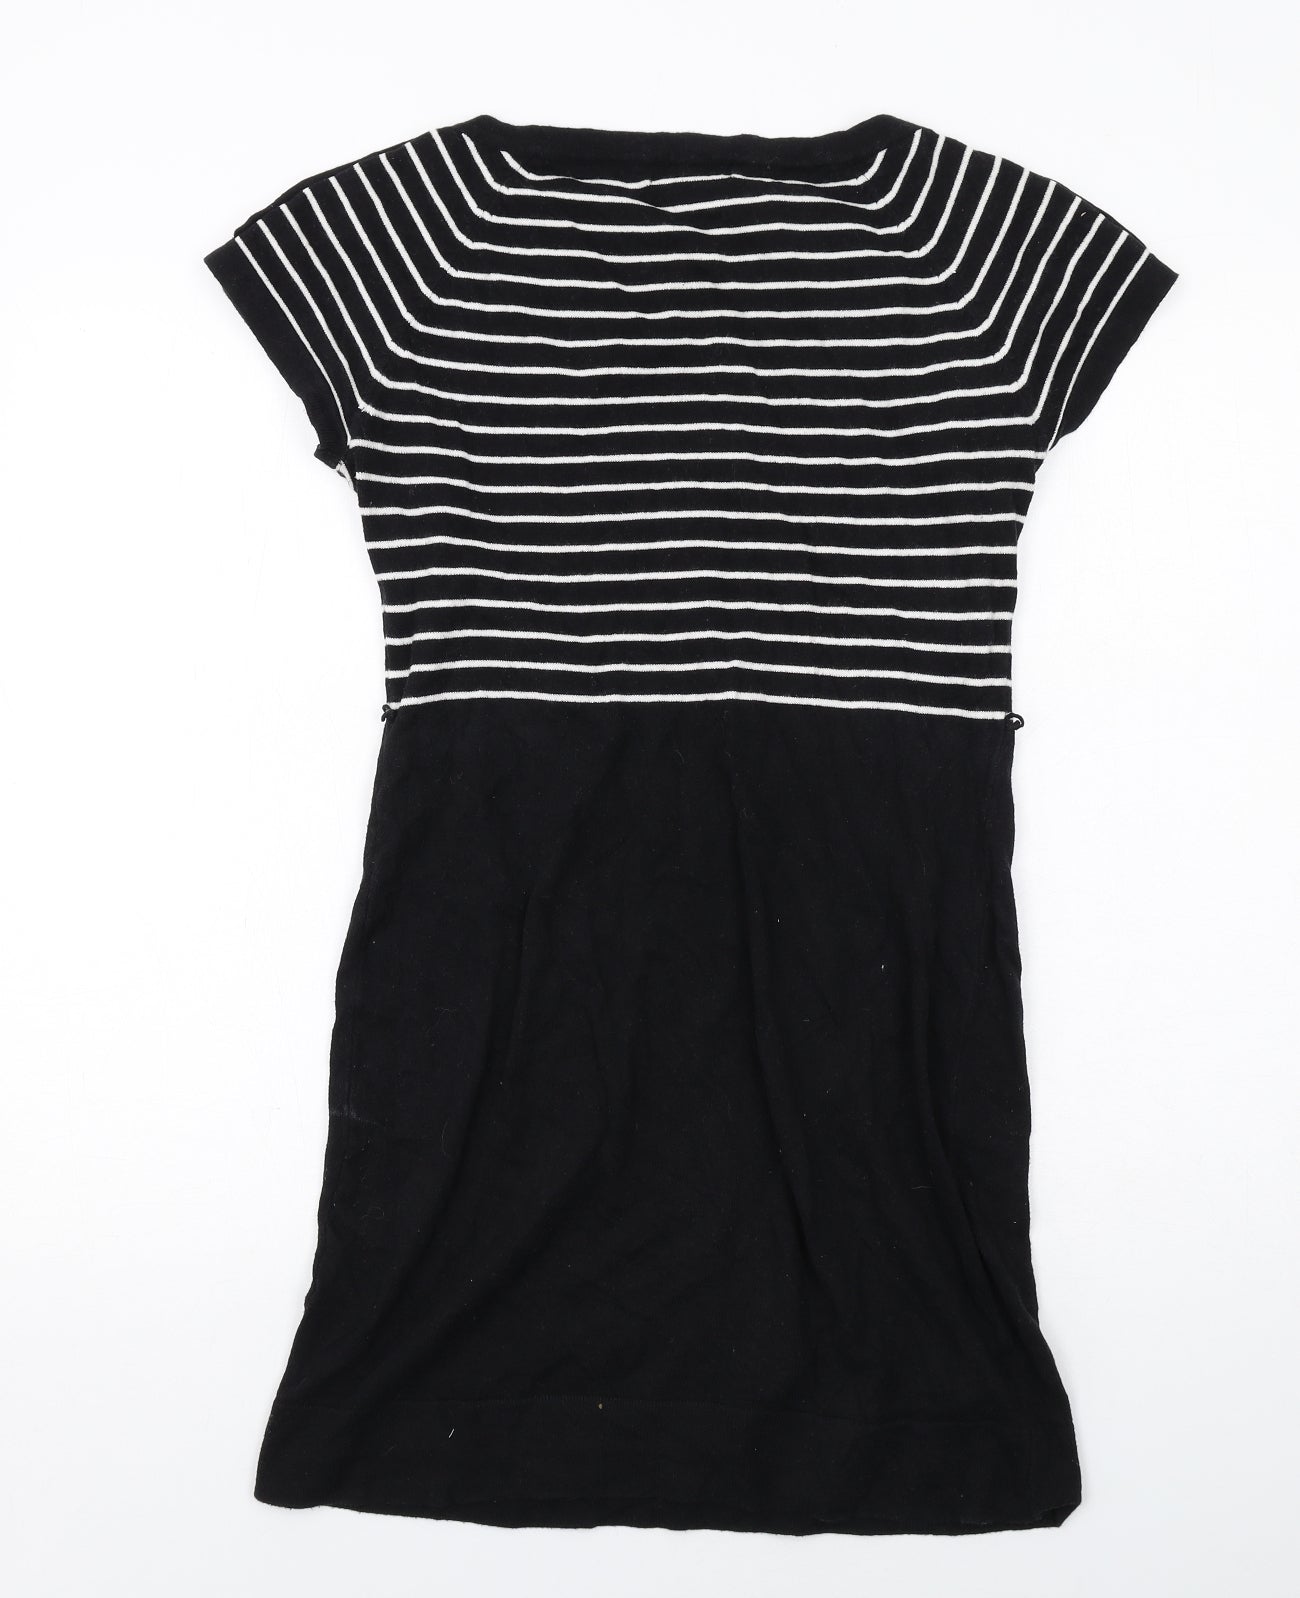 NEXT Womens Black Striped Cotton T-Shirt Dress Size 10 Boat Neck Pullover